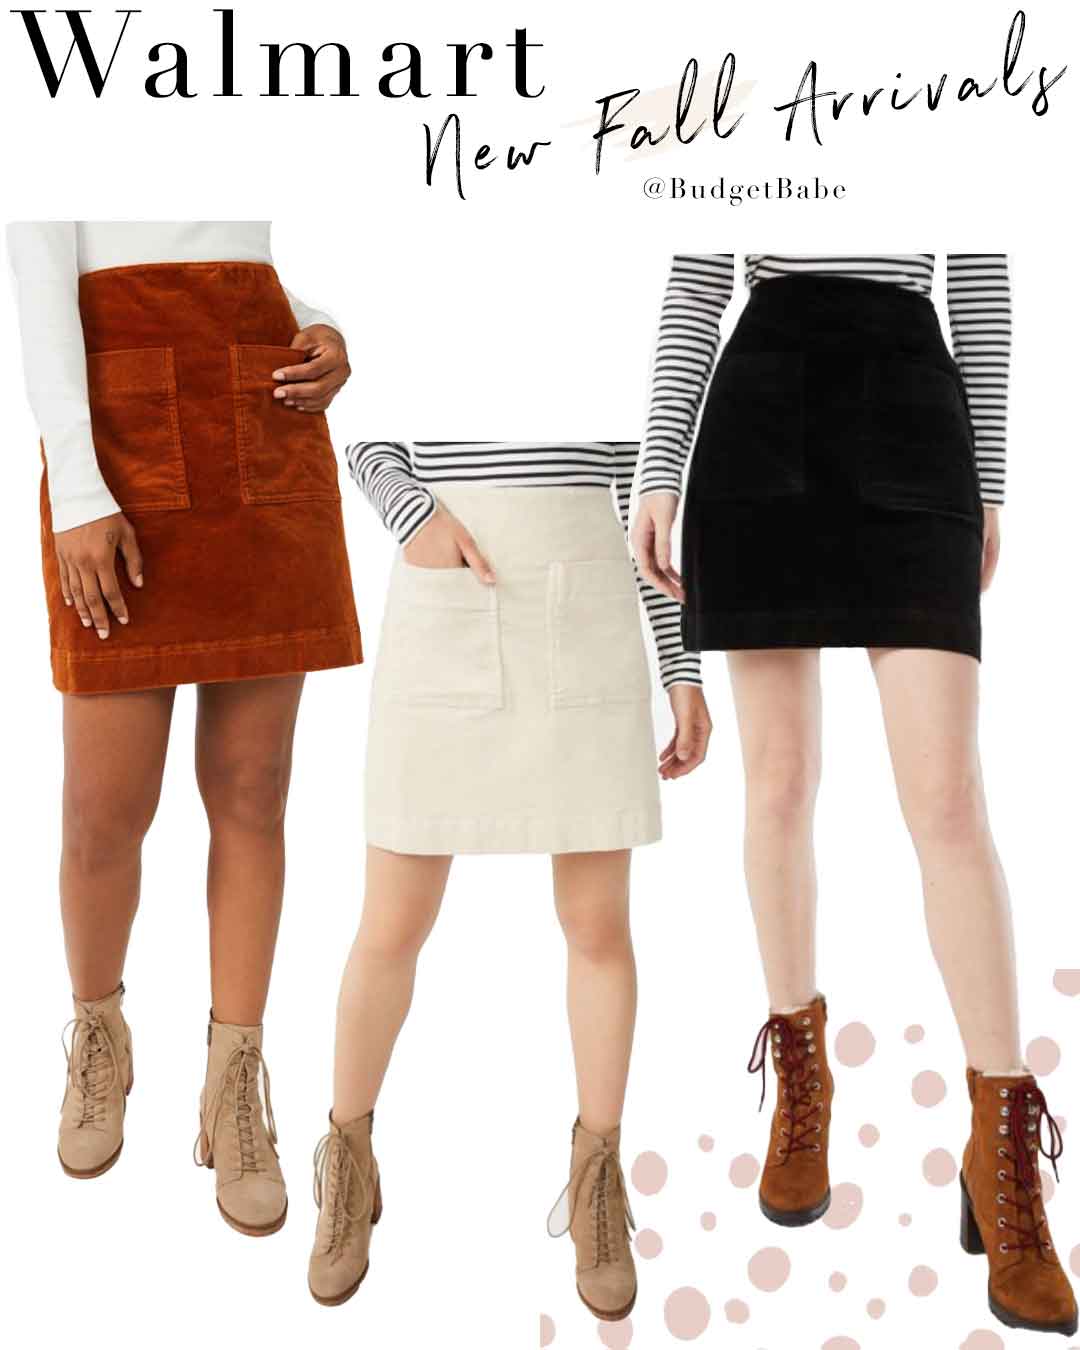 Walmart suede skirts for Fall